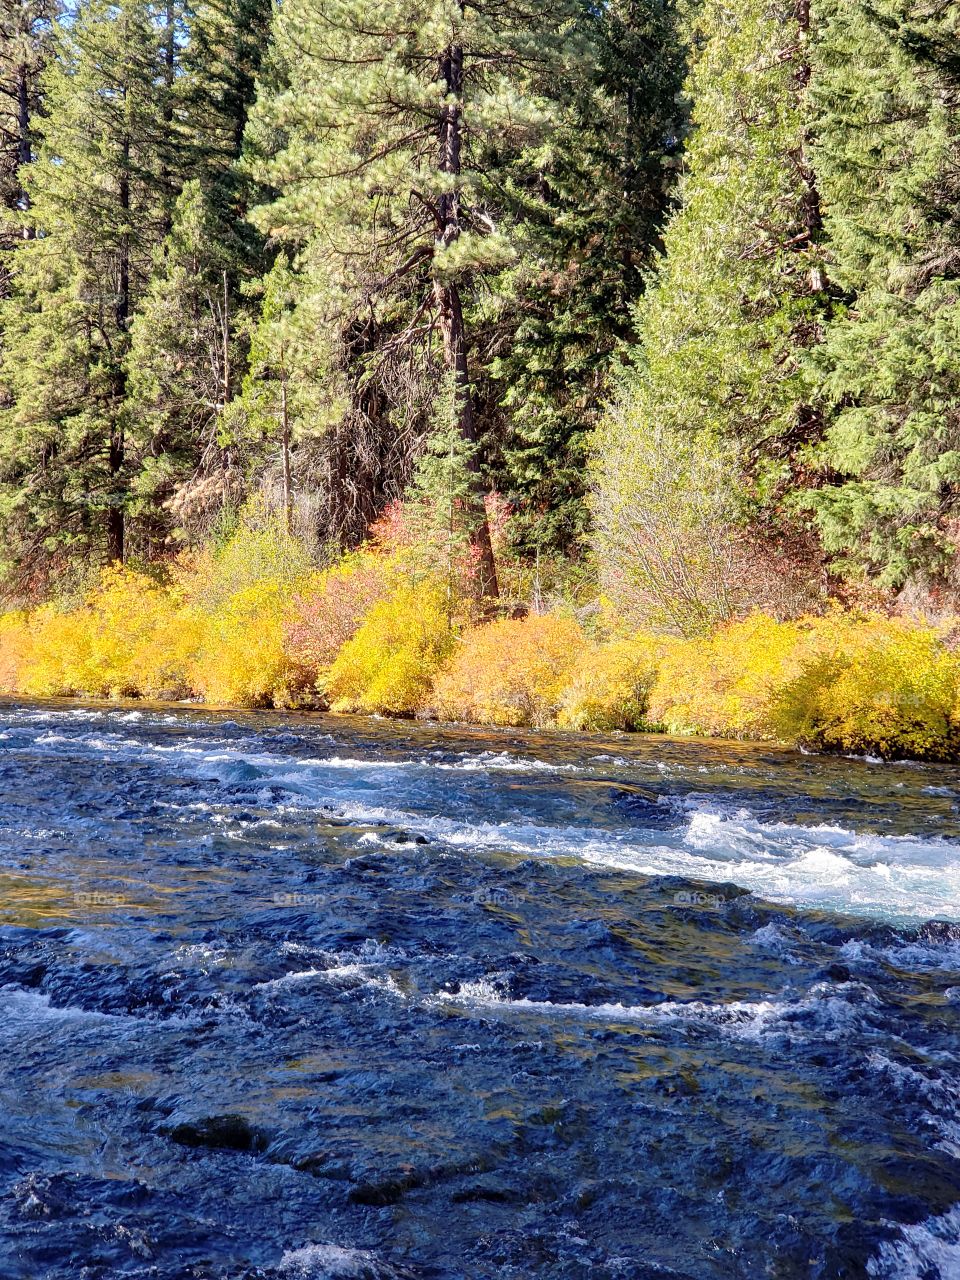 Stunning fall colors on the riverbanks of the turquoise waters of the Metolius River at Wizard Falls in Central Oregon on a sunny autumn morning.